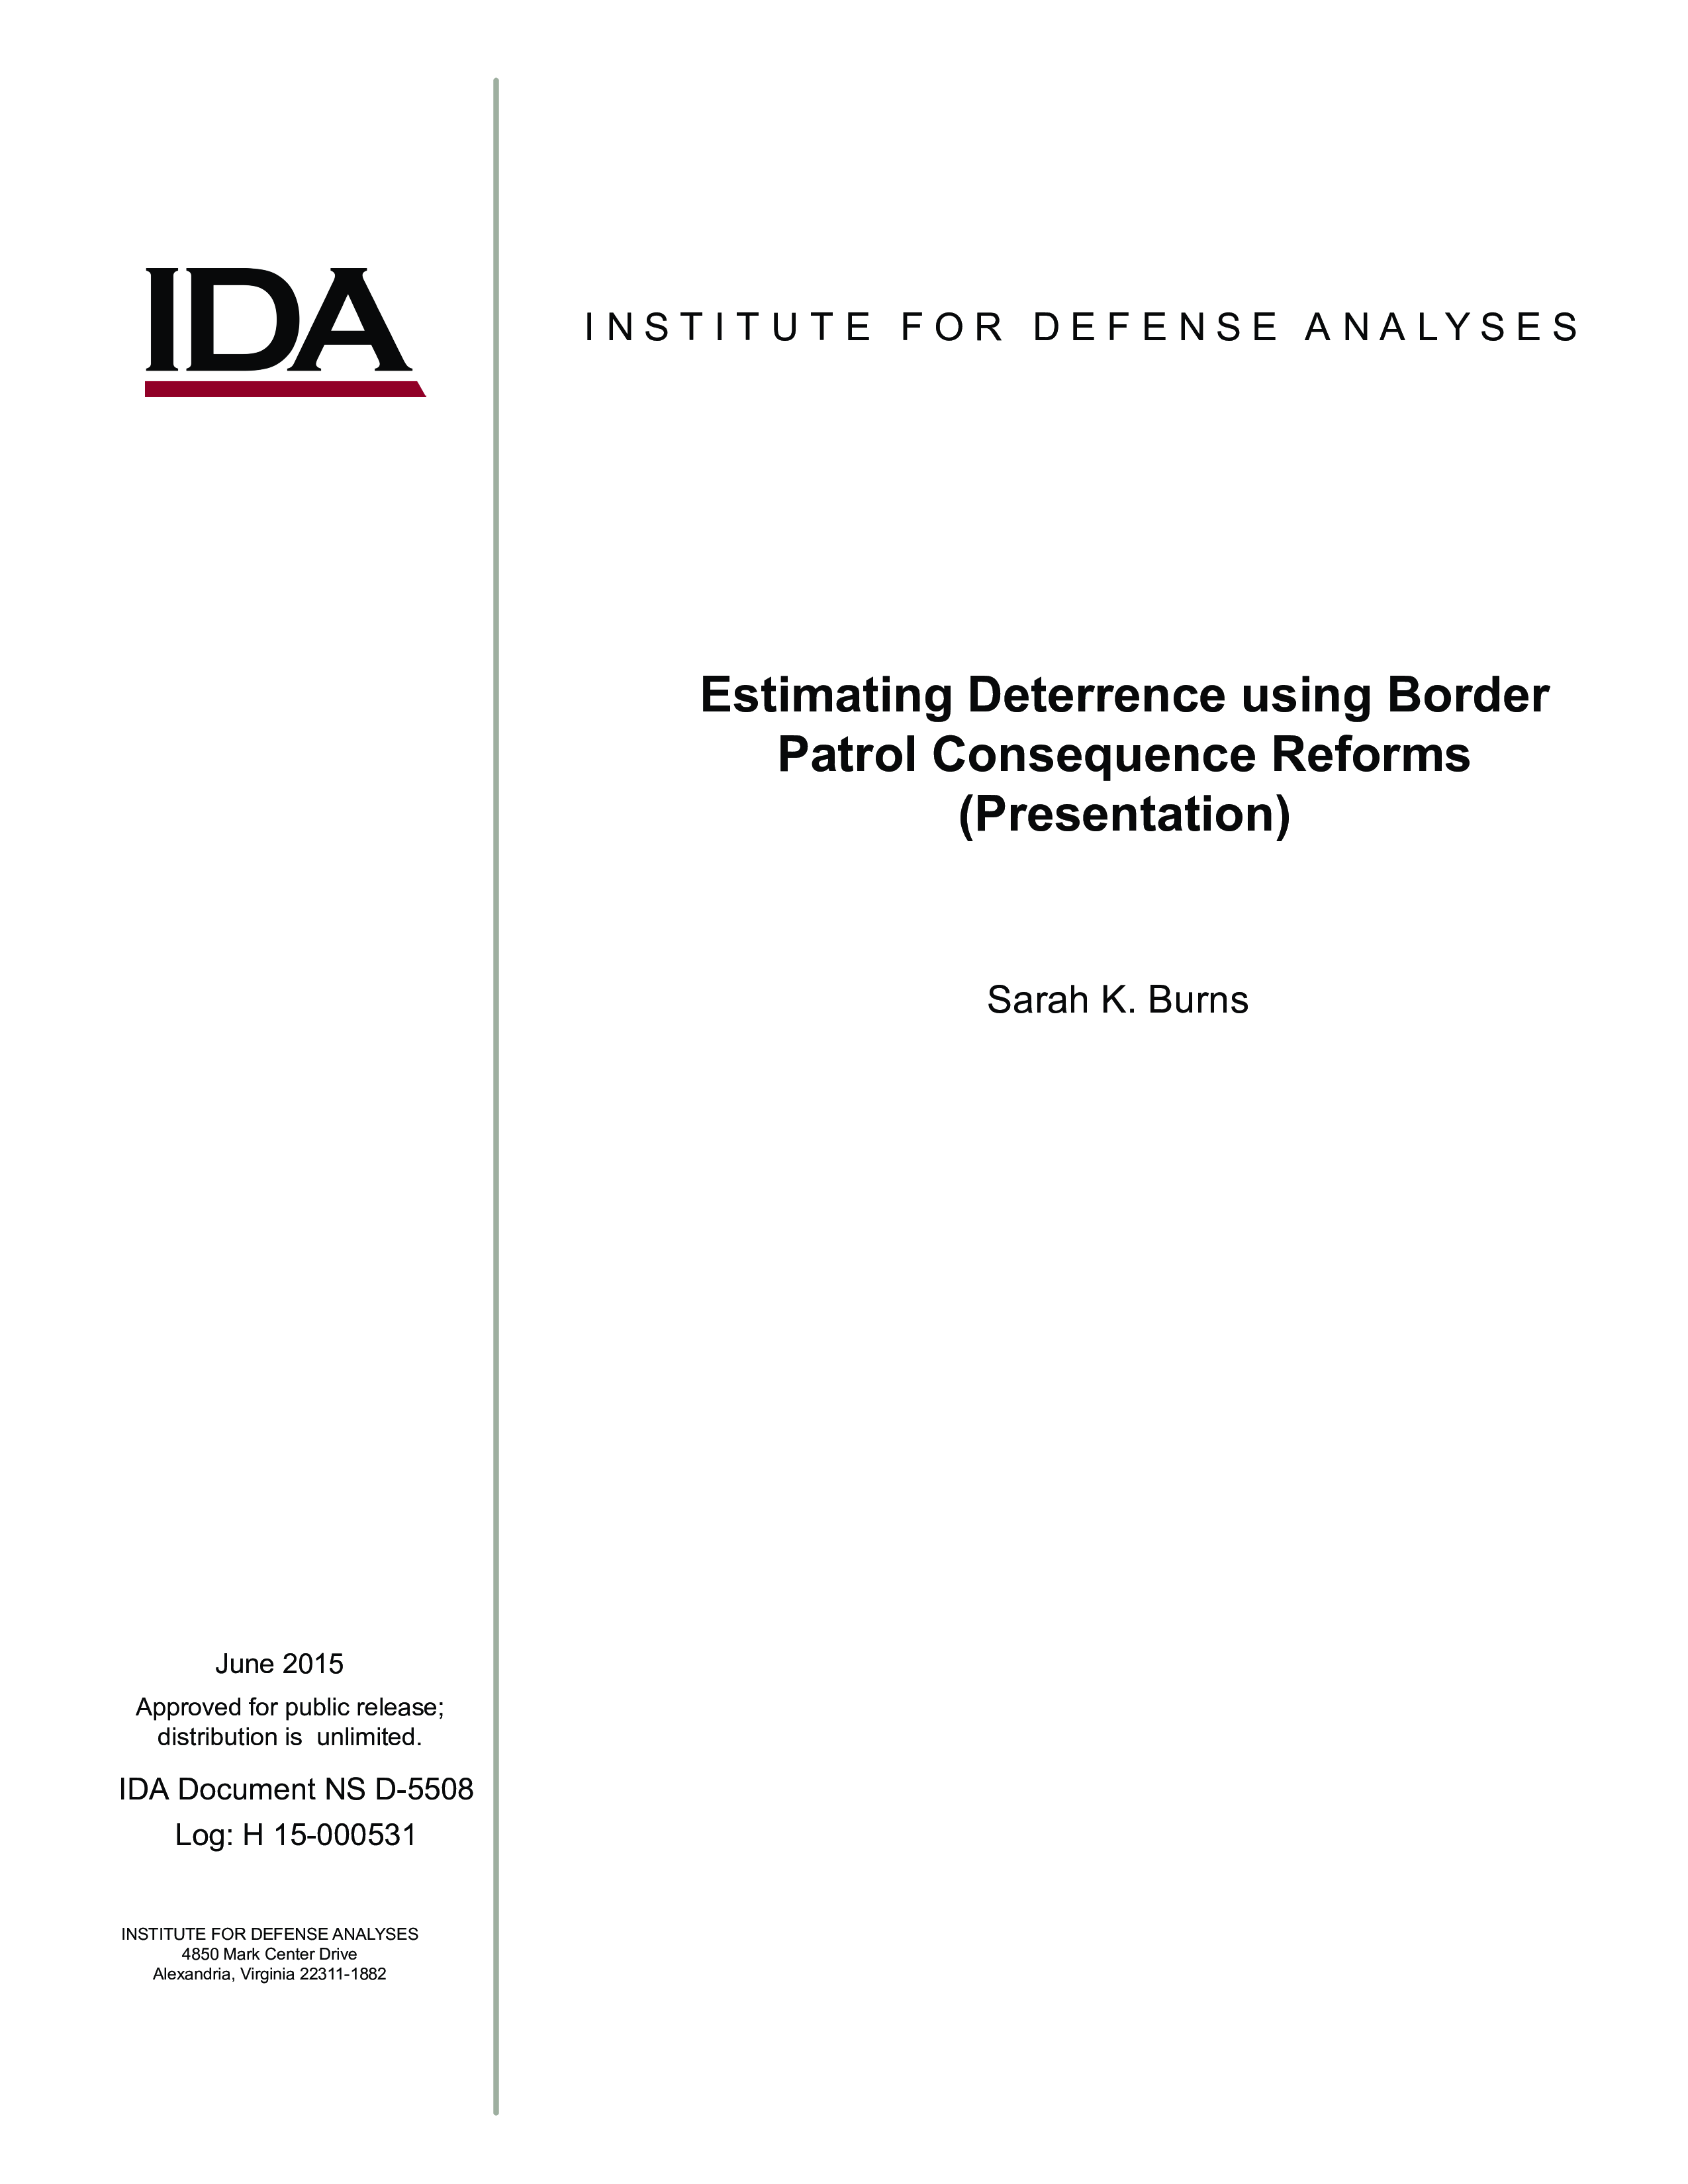 Estimating Deterrence using Border Patrol Consequence Reforms (Presentation)